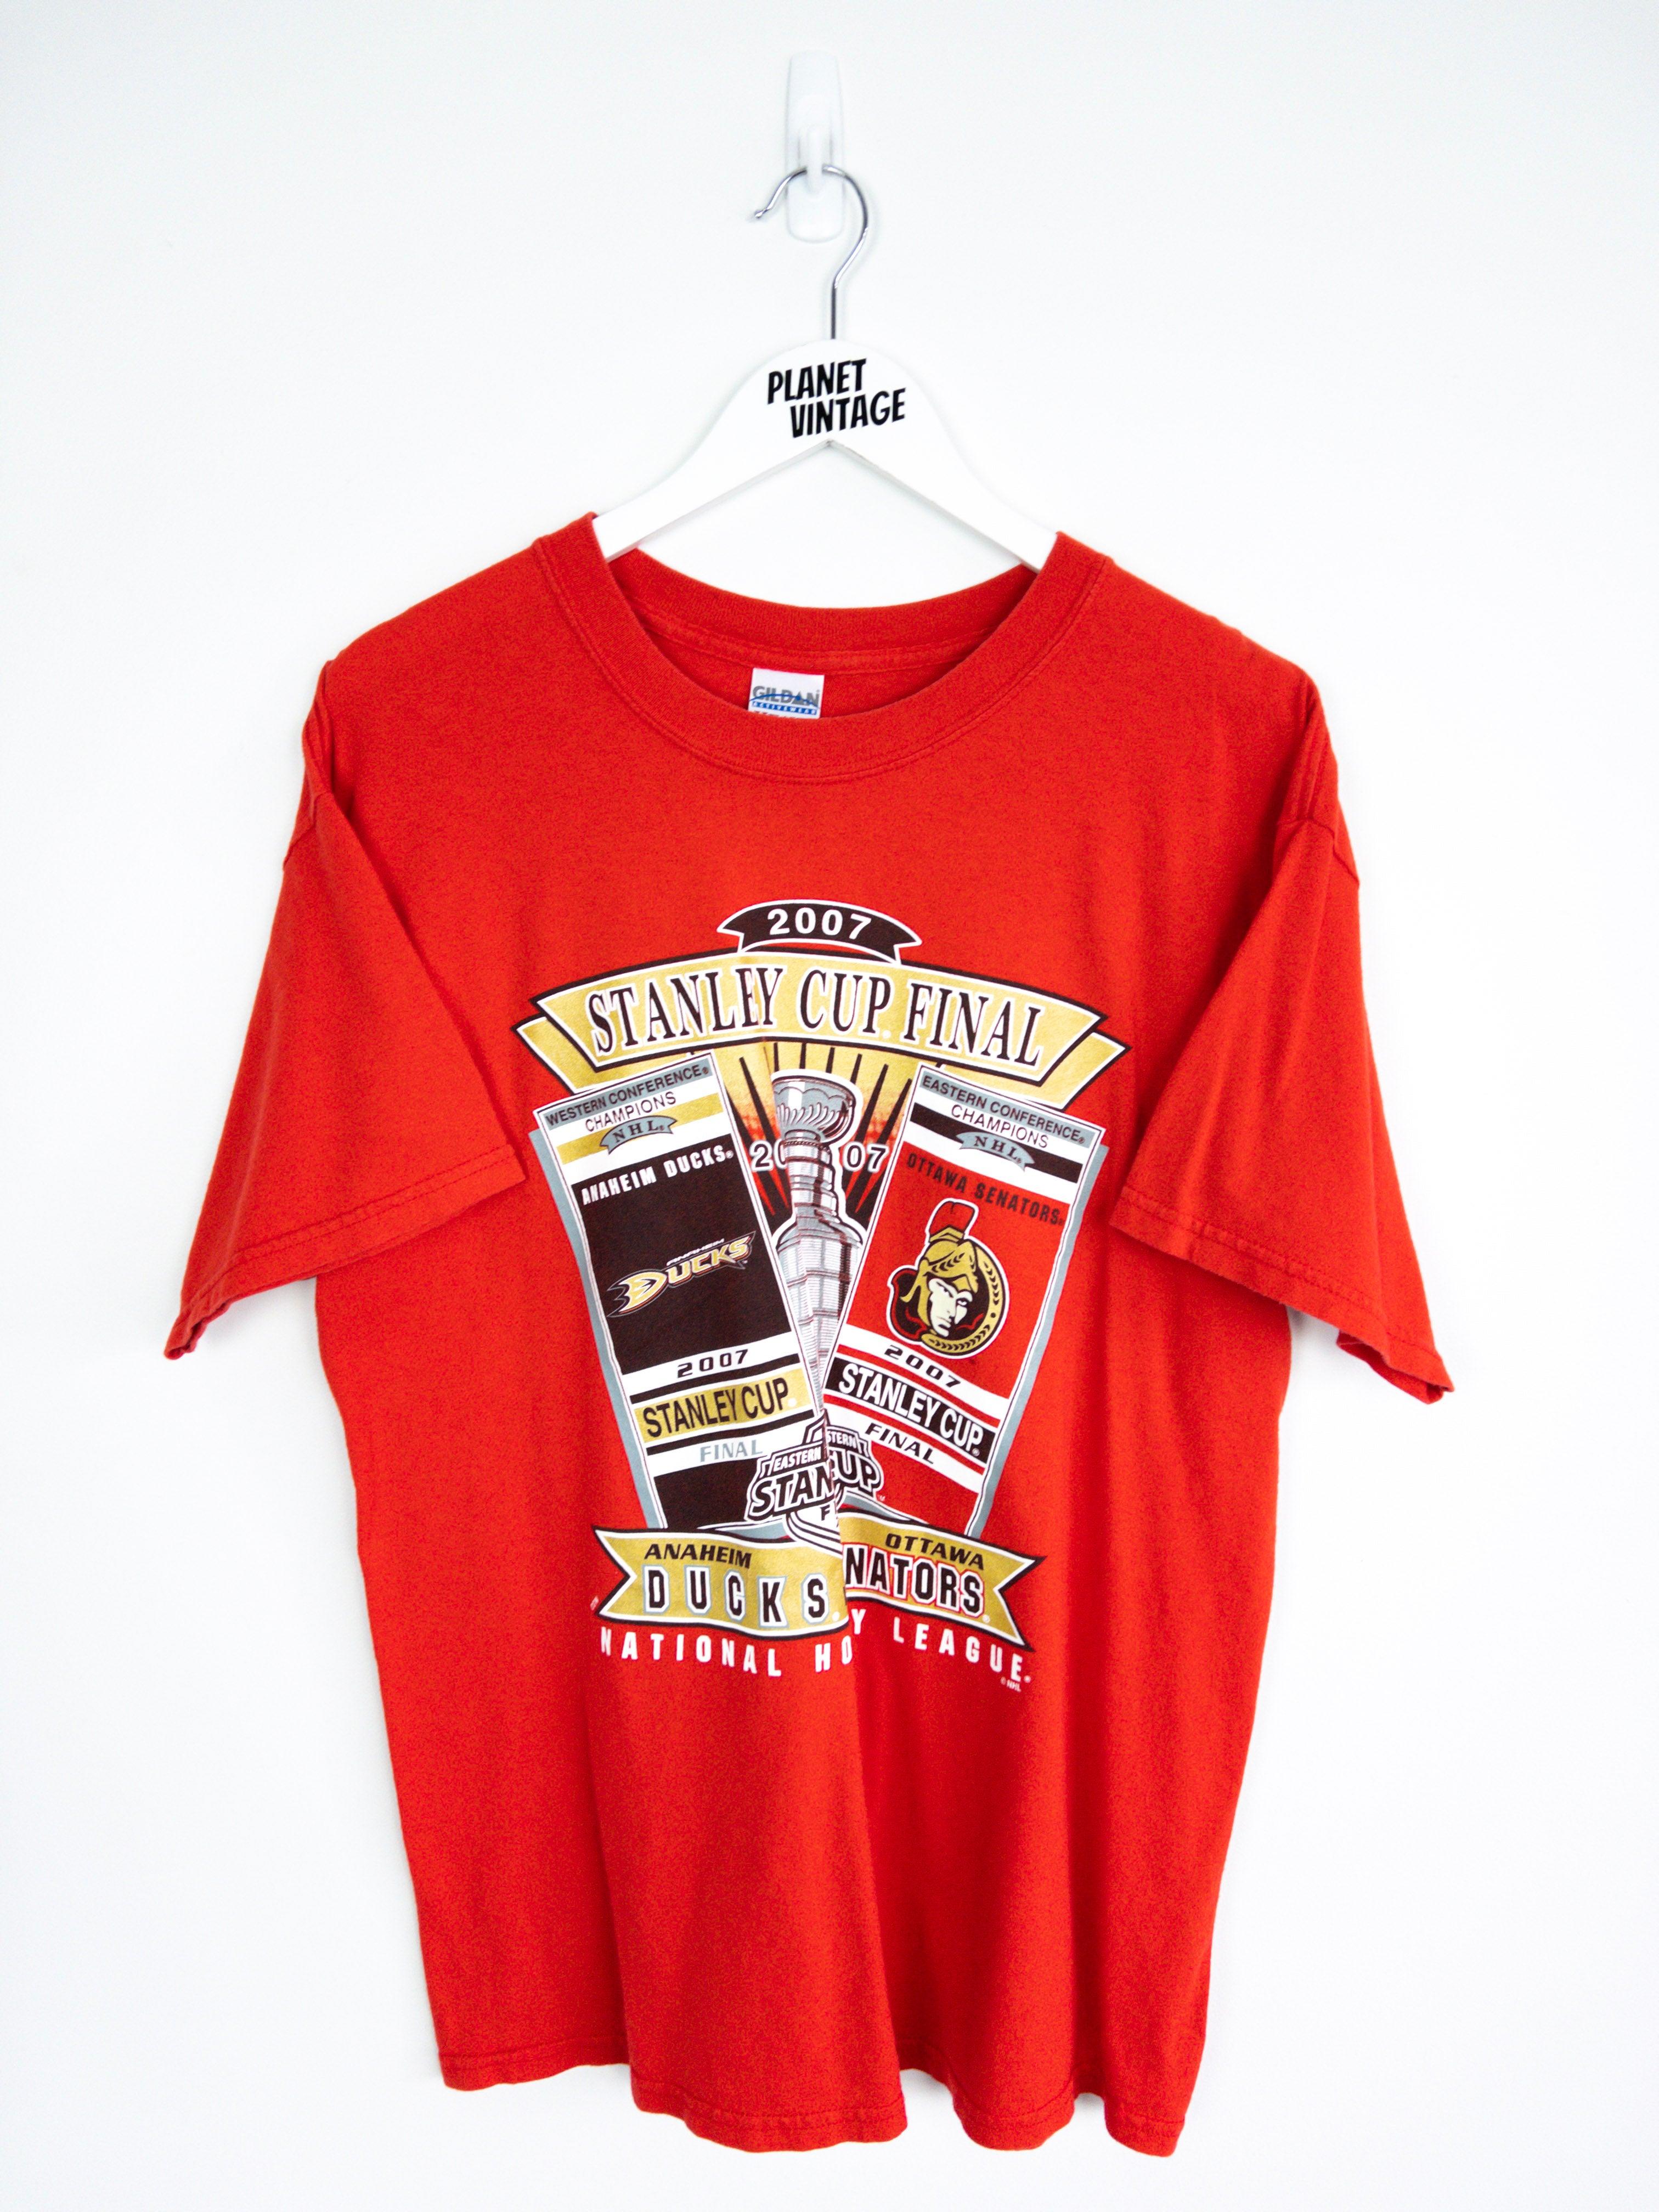 Stanley Cup Finals 2007 Tee (L) - Planet Vintage Store